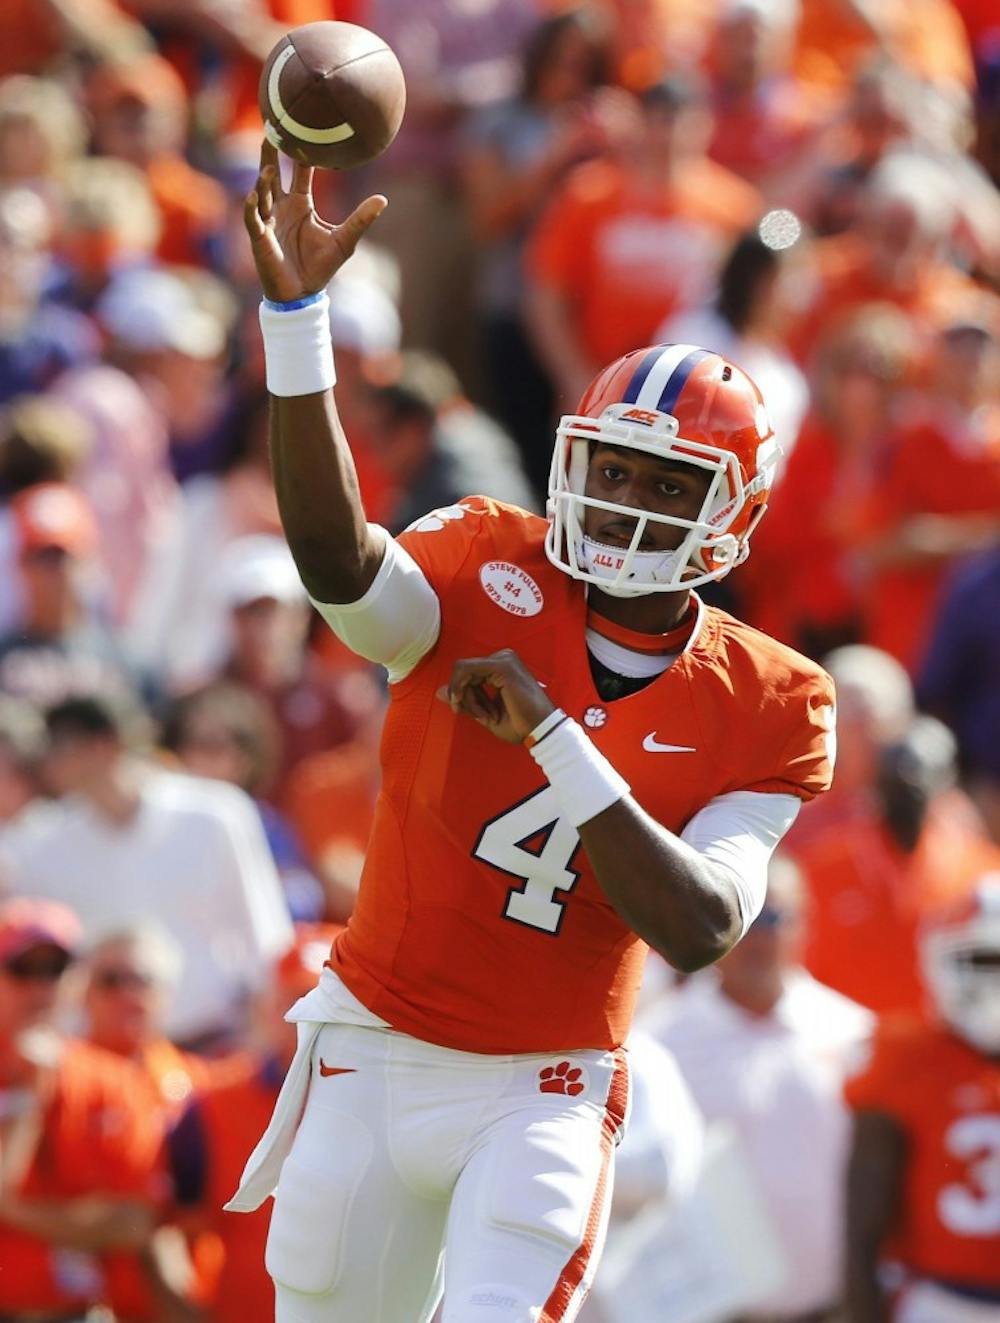 Clemson quarterback Deshaun Watson (4) passes during the first half against North Carolina State at Memorial Stadium in Clemson, S.C., Saturday, Oct. 4, 2014. (Ethan Hyman/Raleigh News & Observer/MCT)